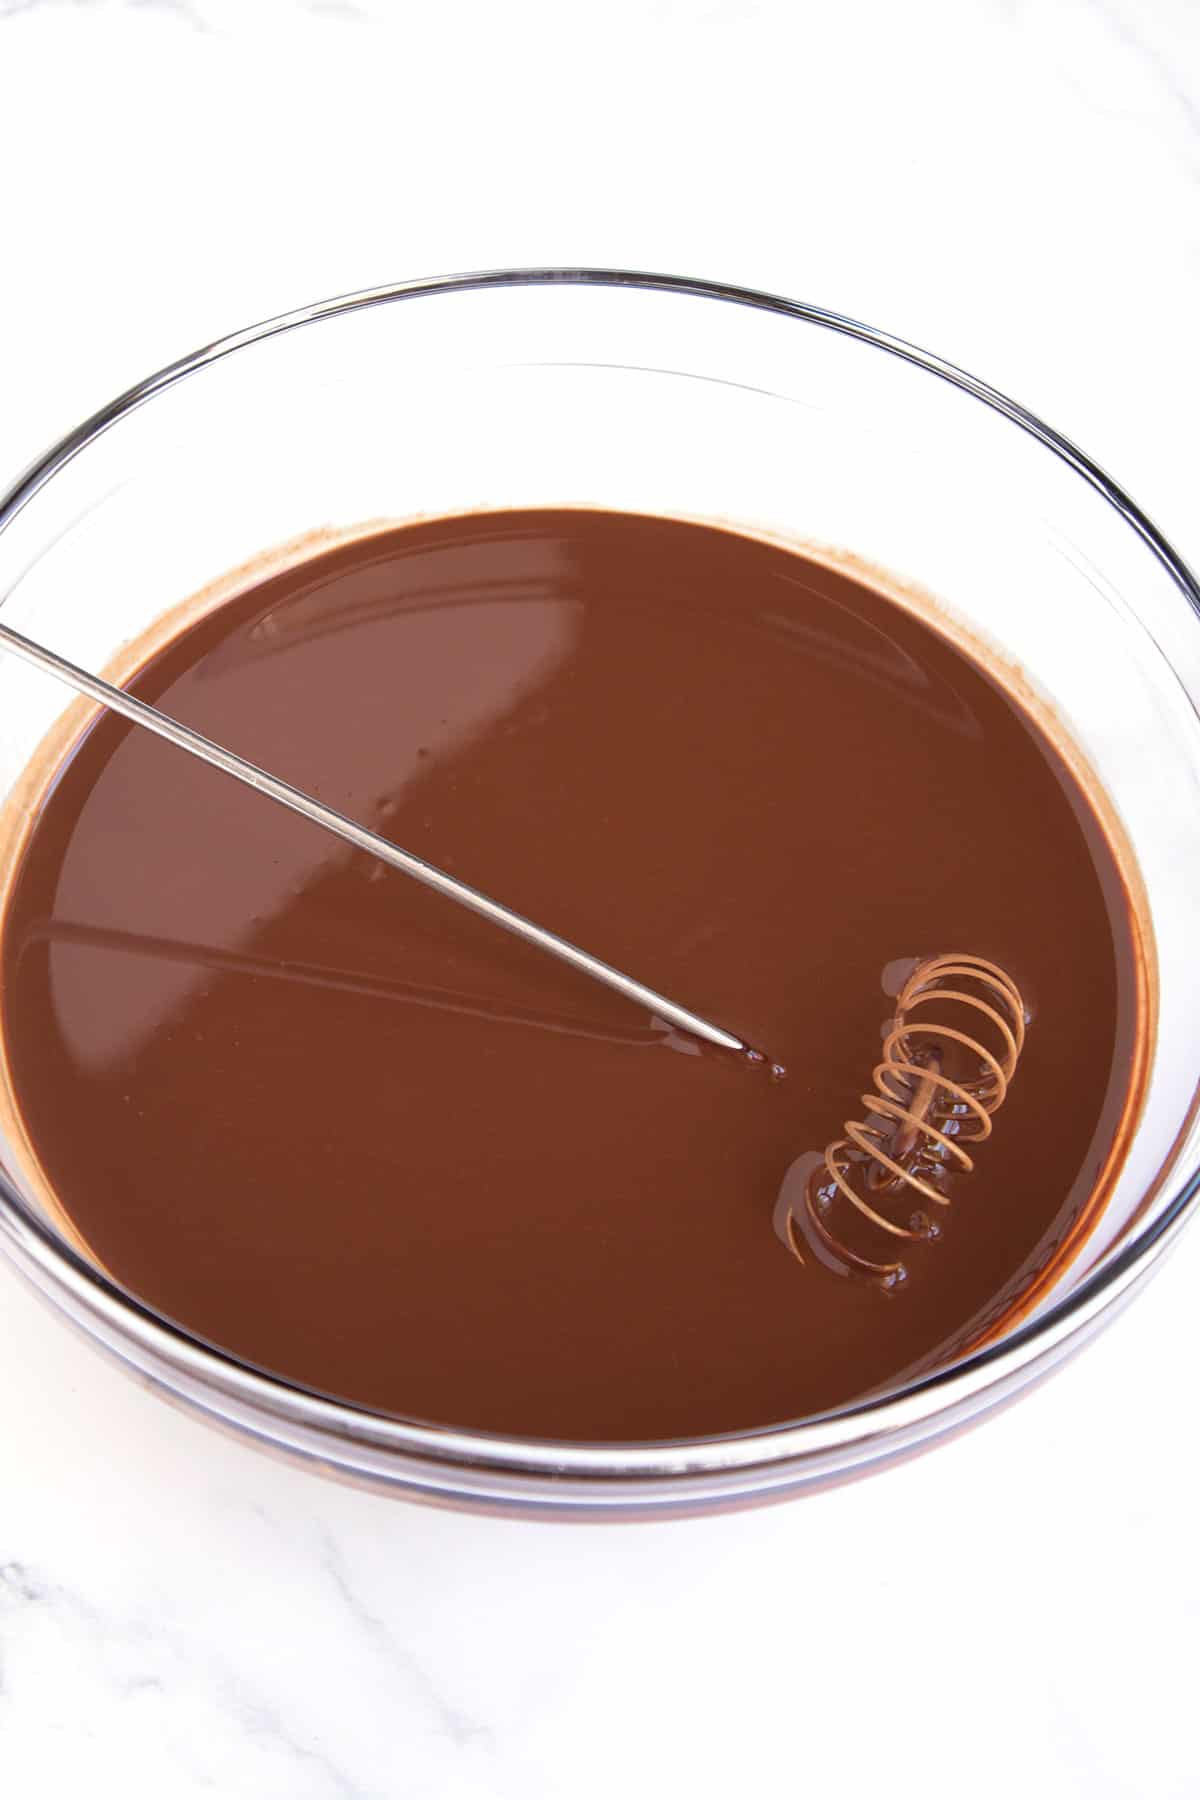 Cocoa powder and coffee mixed in a glass bowl with a whisk in the bowl.